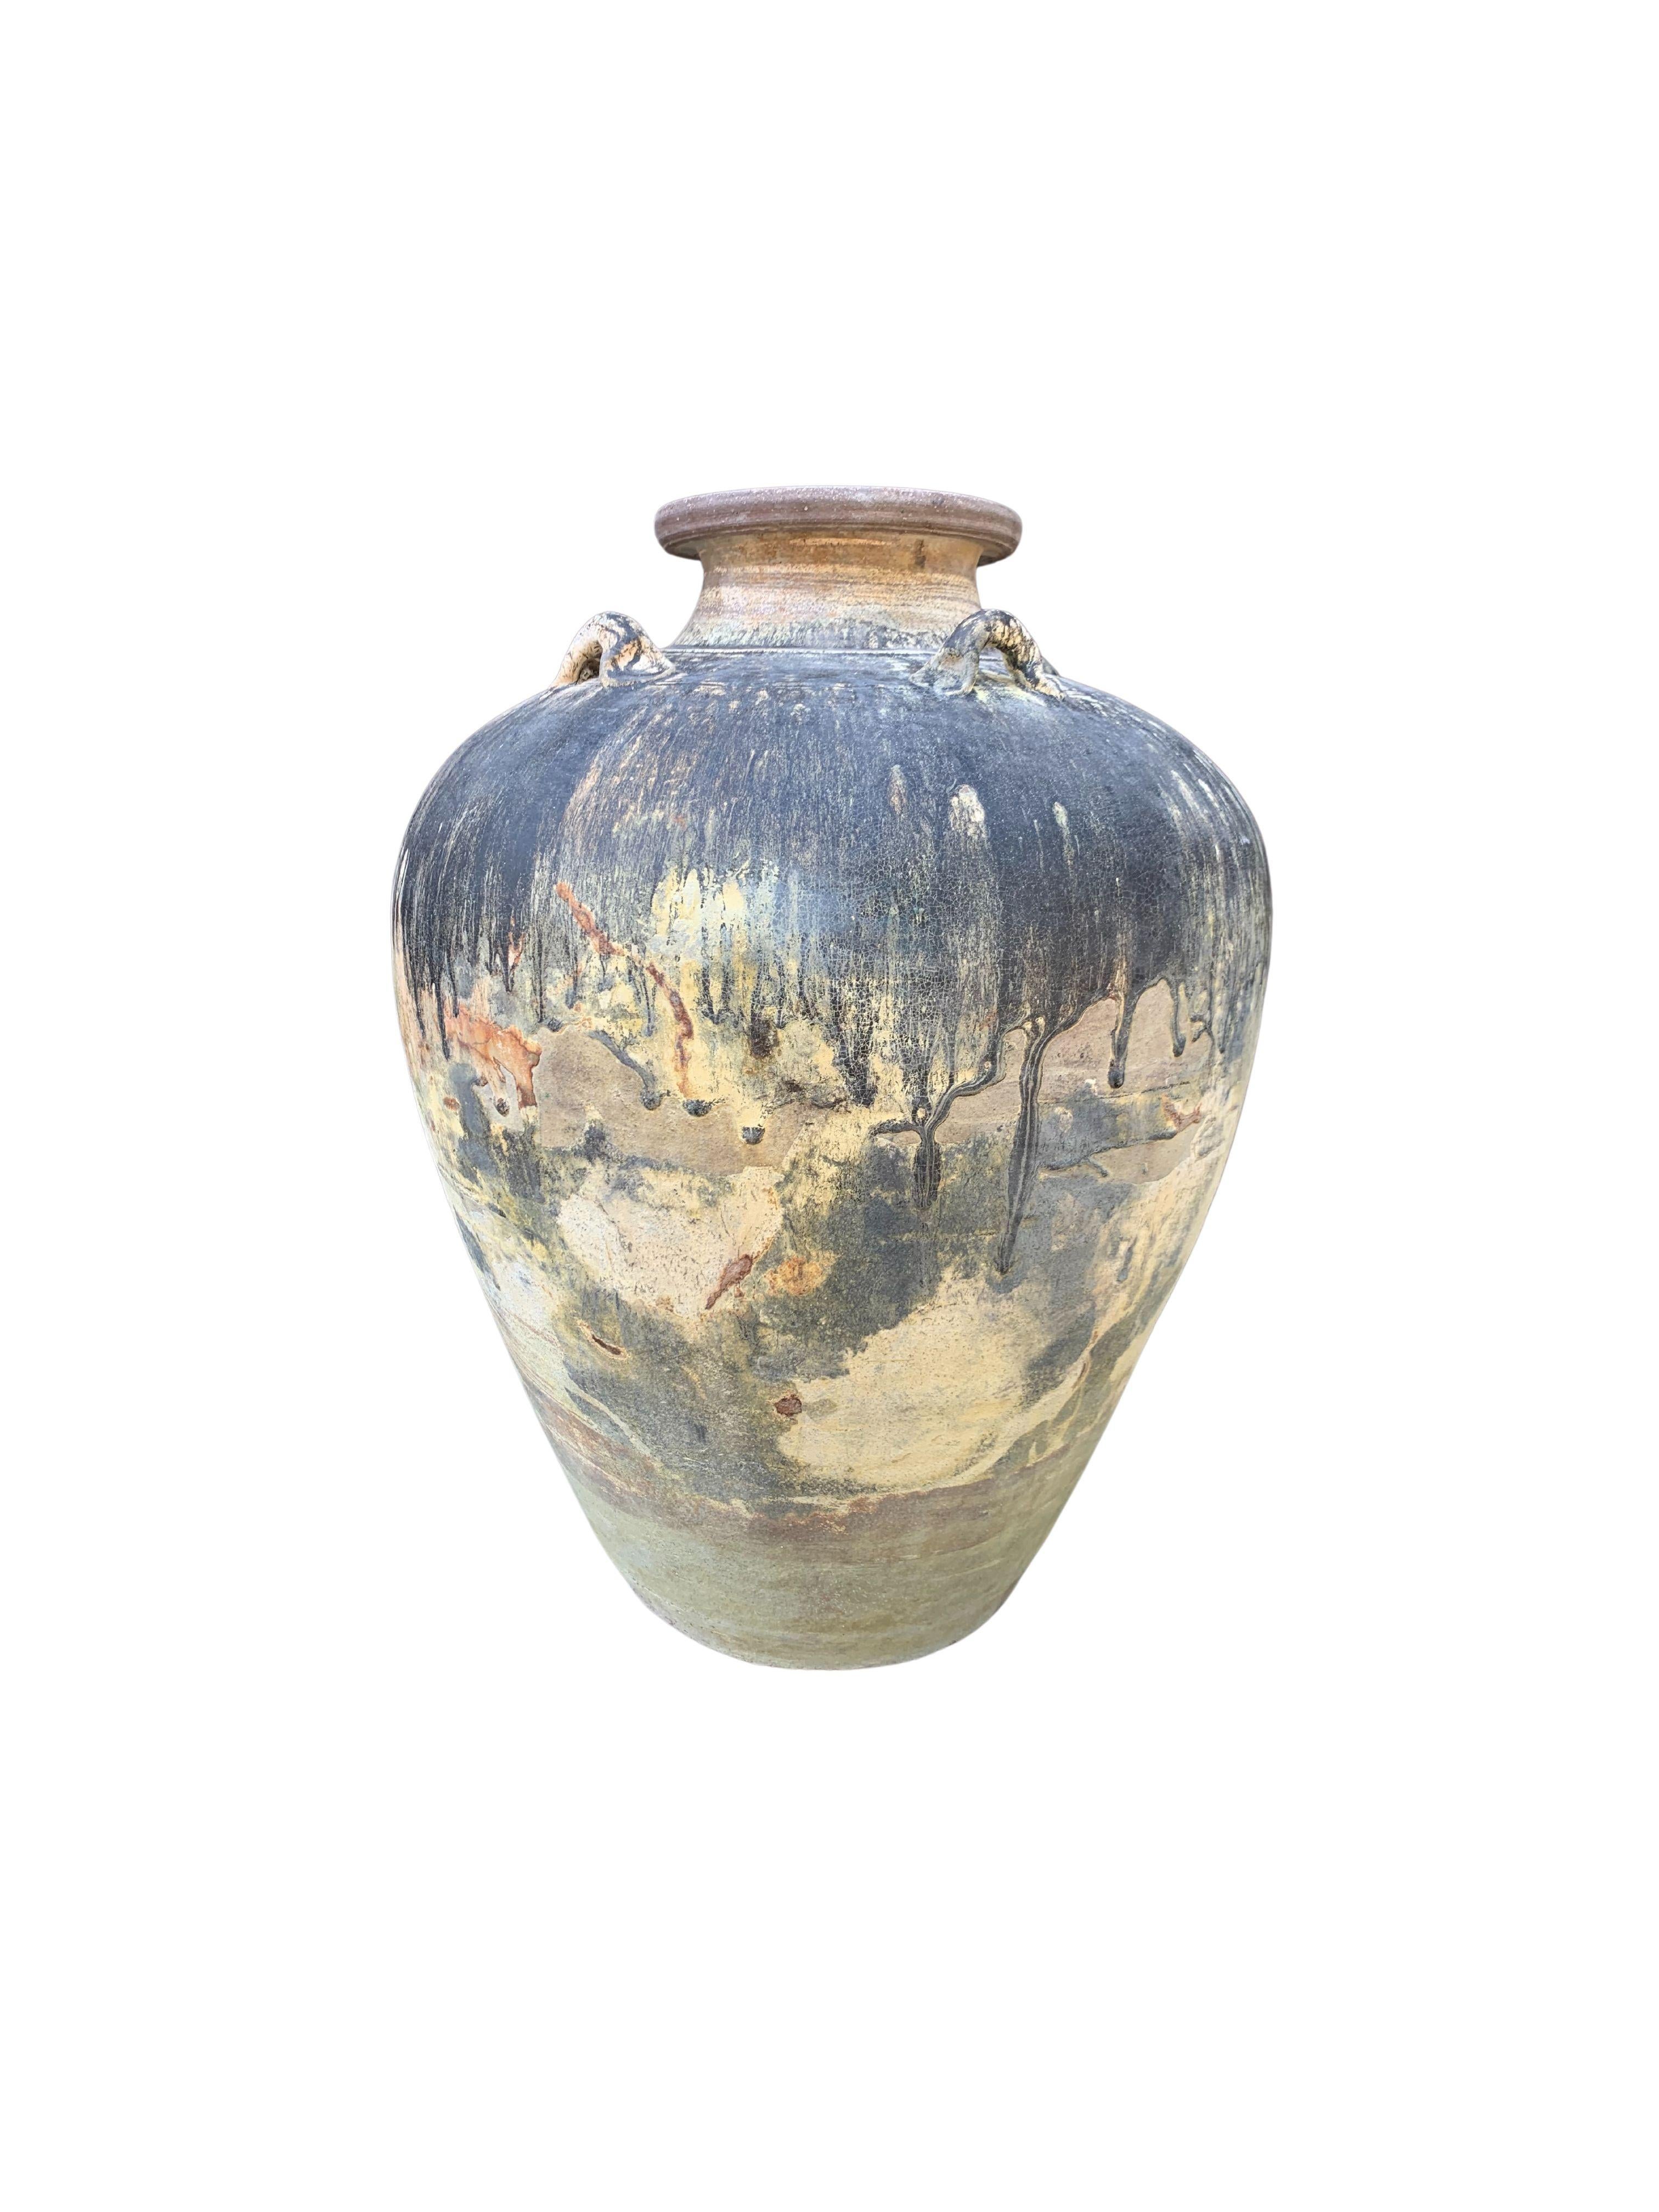 A wonderful example of a 16th Century Sawankhalok jar from a Shipwreck off the Coast of the Indonesian Island of Batam. Batam was one of the most substantial and influential ports in the South China Sea where an abundance of trade was conducted. The